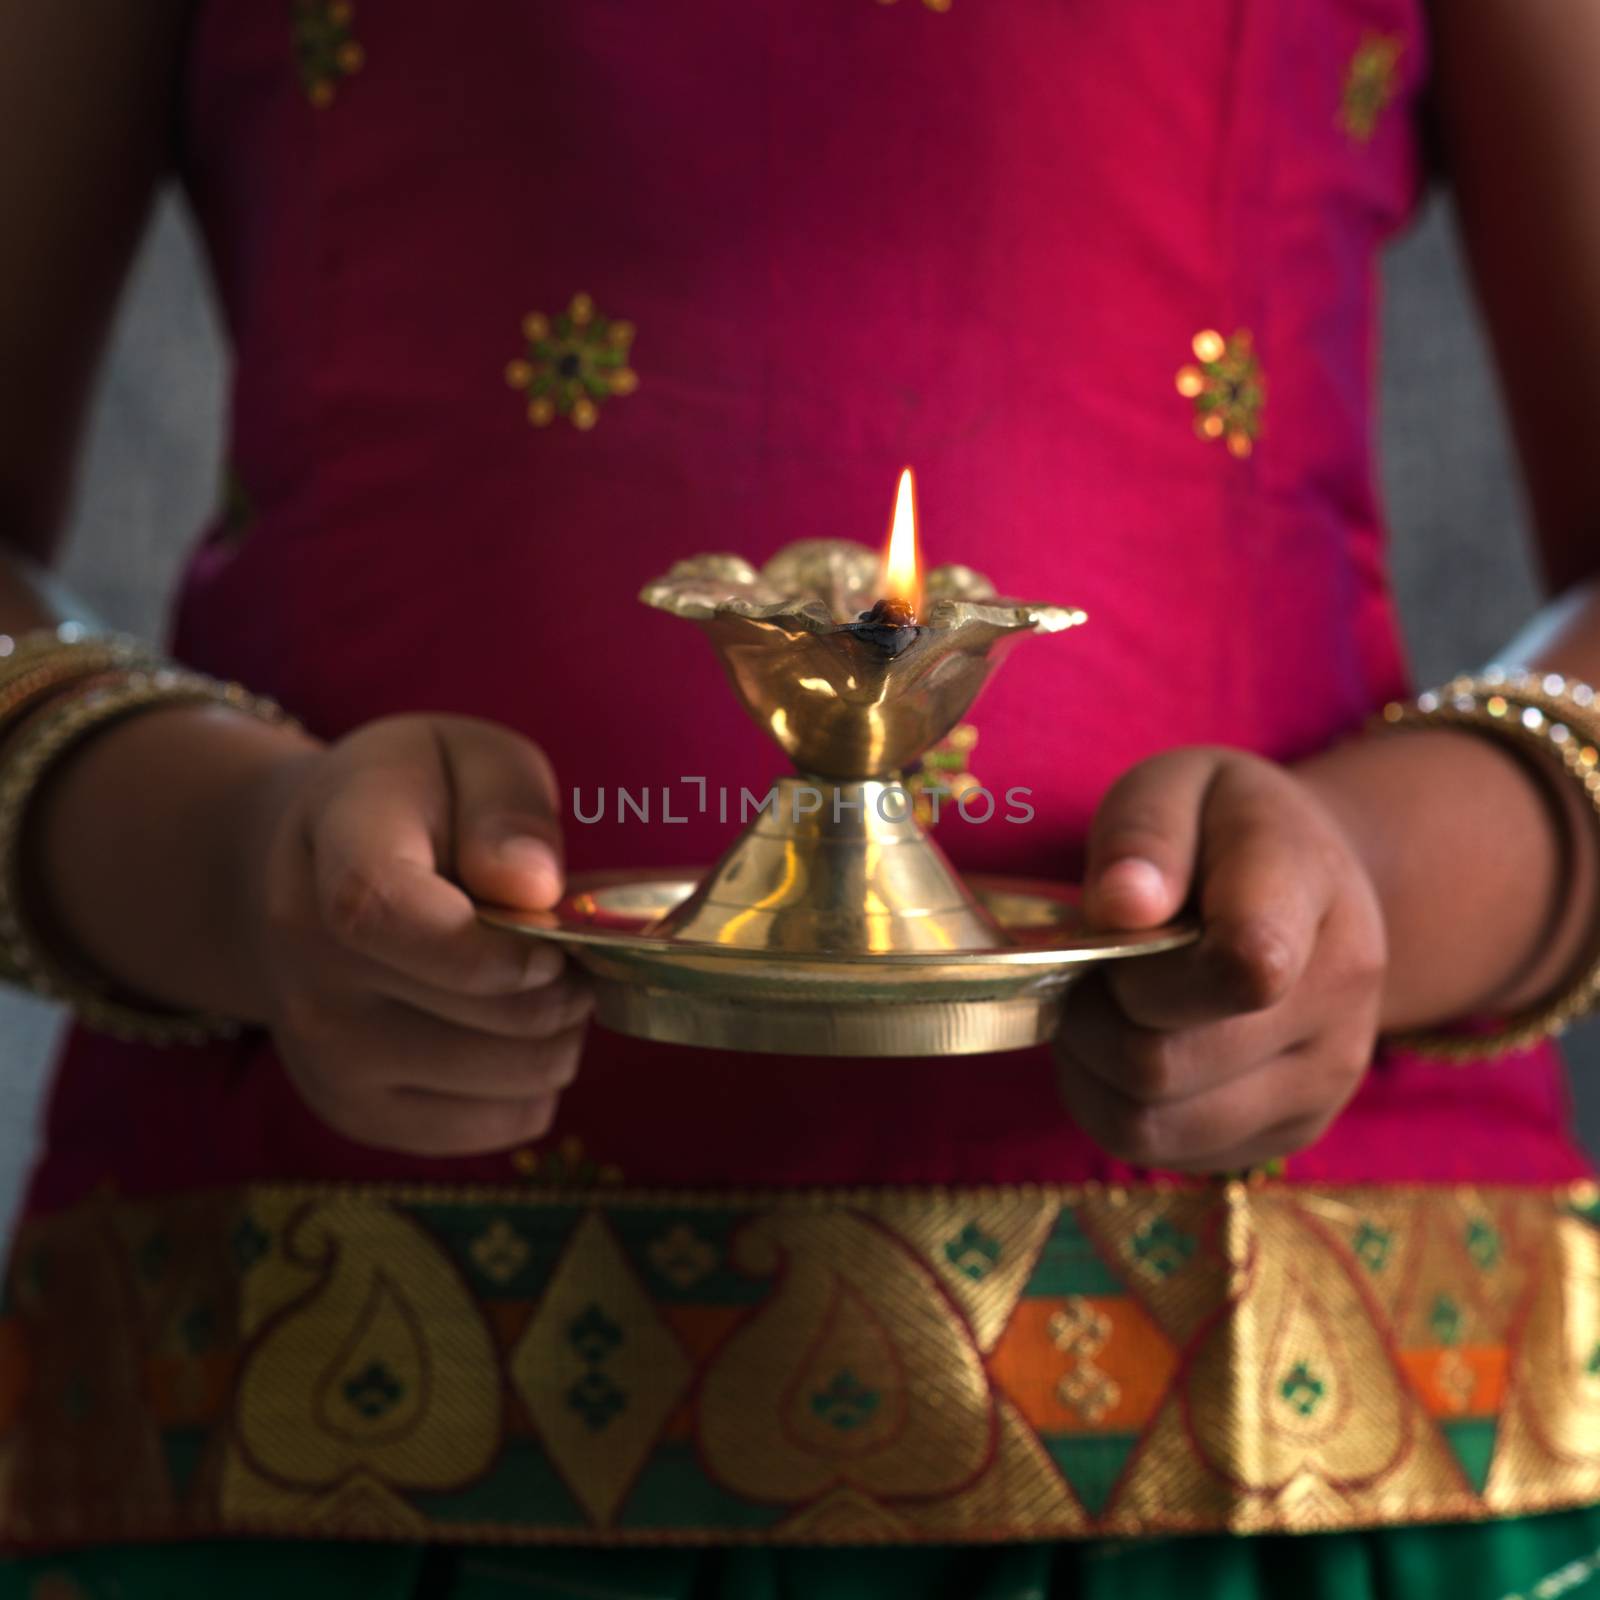 Diwali or deepavali photo with female hands holding oil lamp during festival of light.